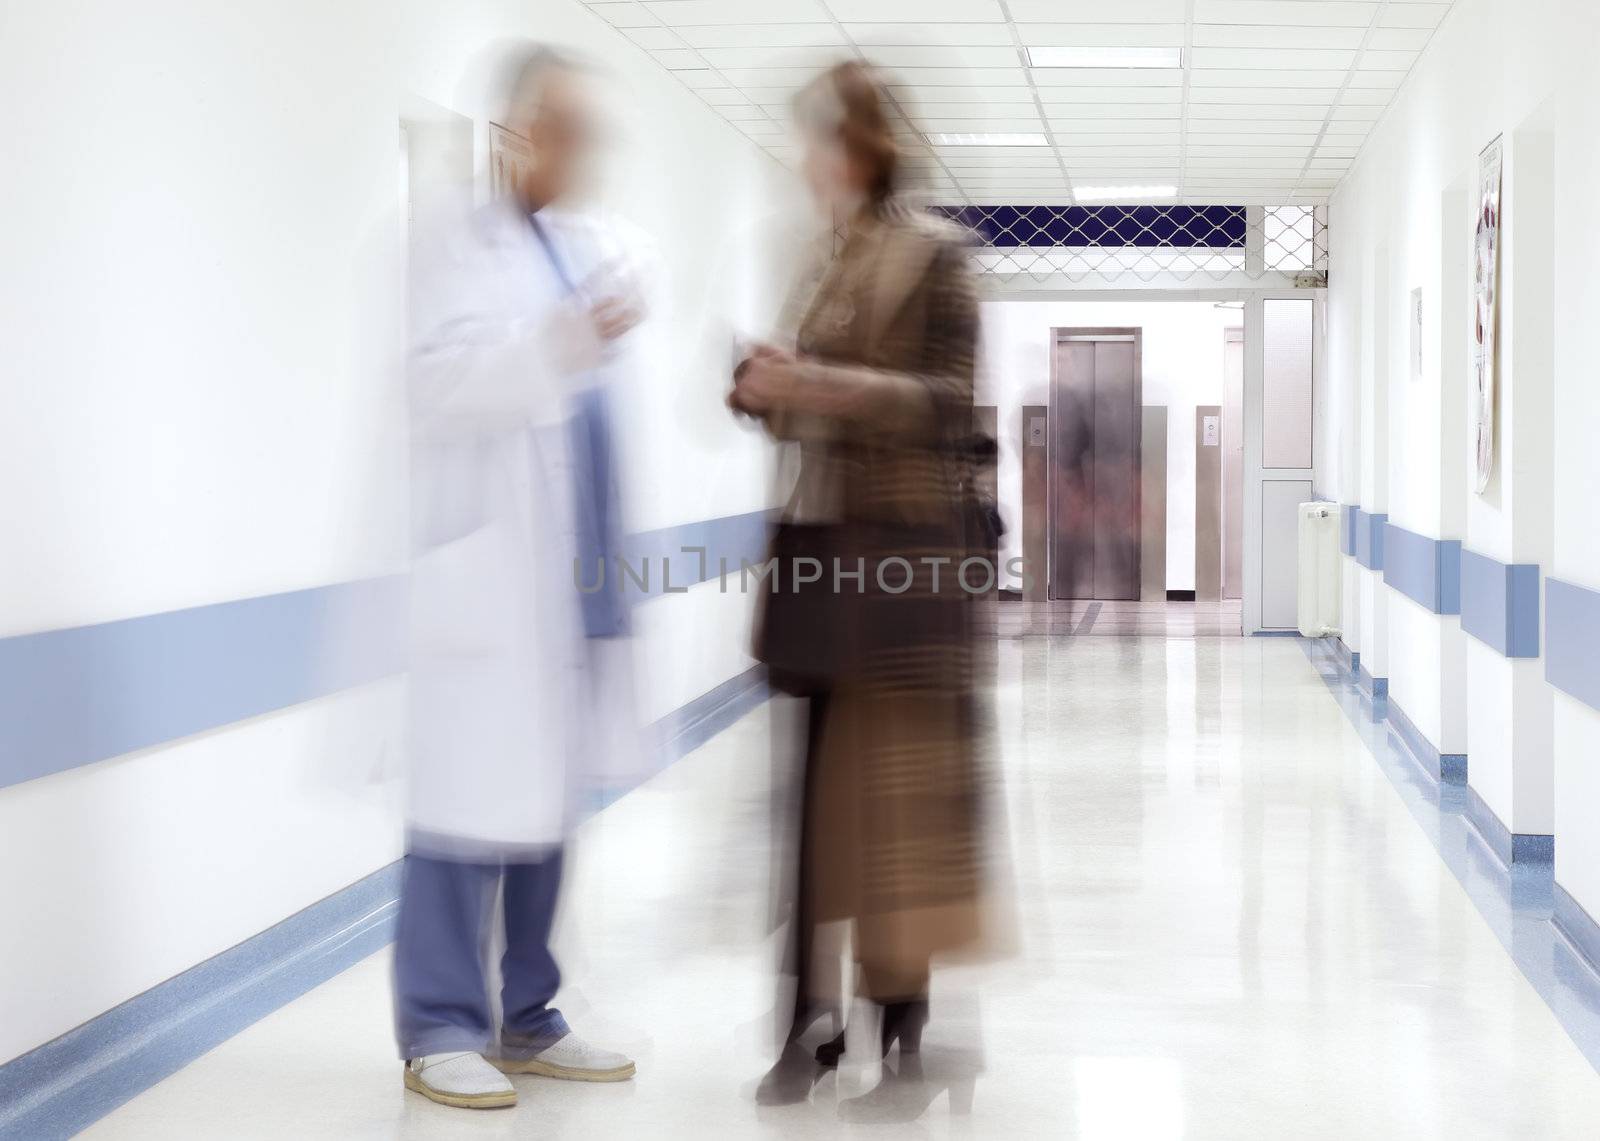 blurred figures of doctor and patient in a hospital corridor